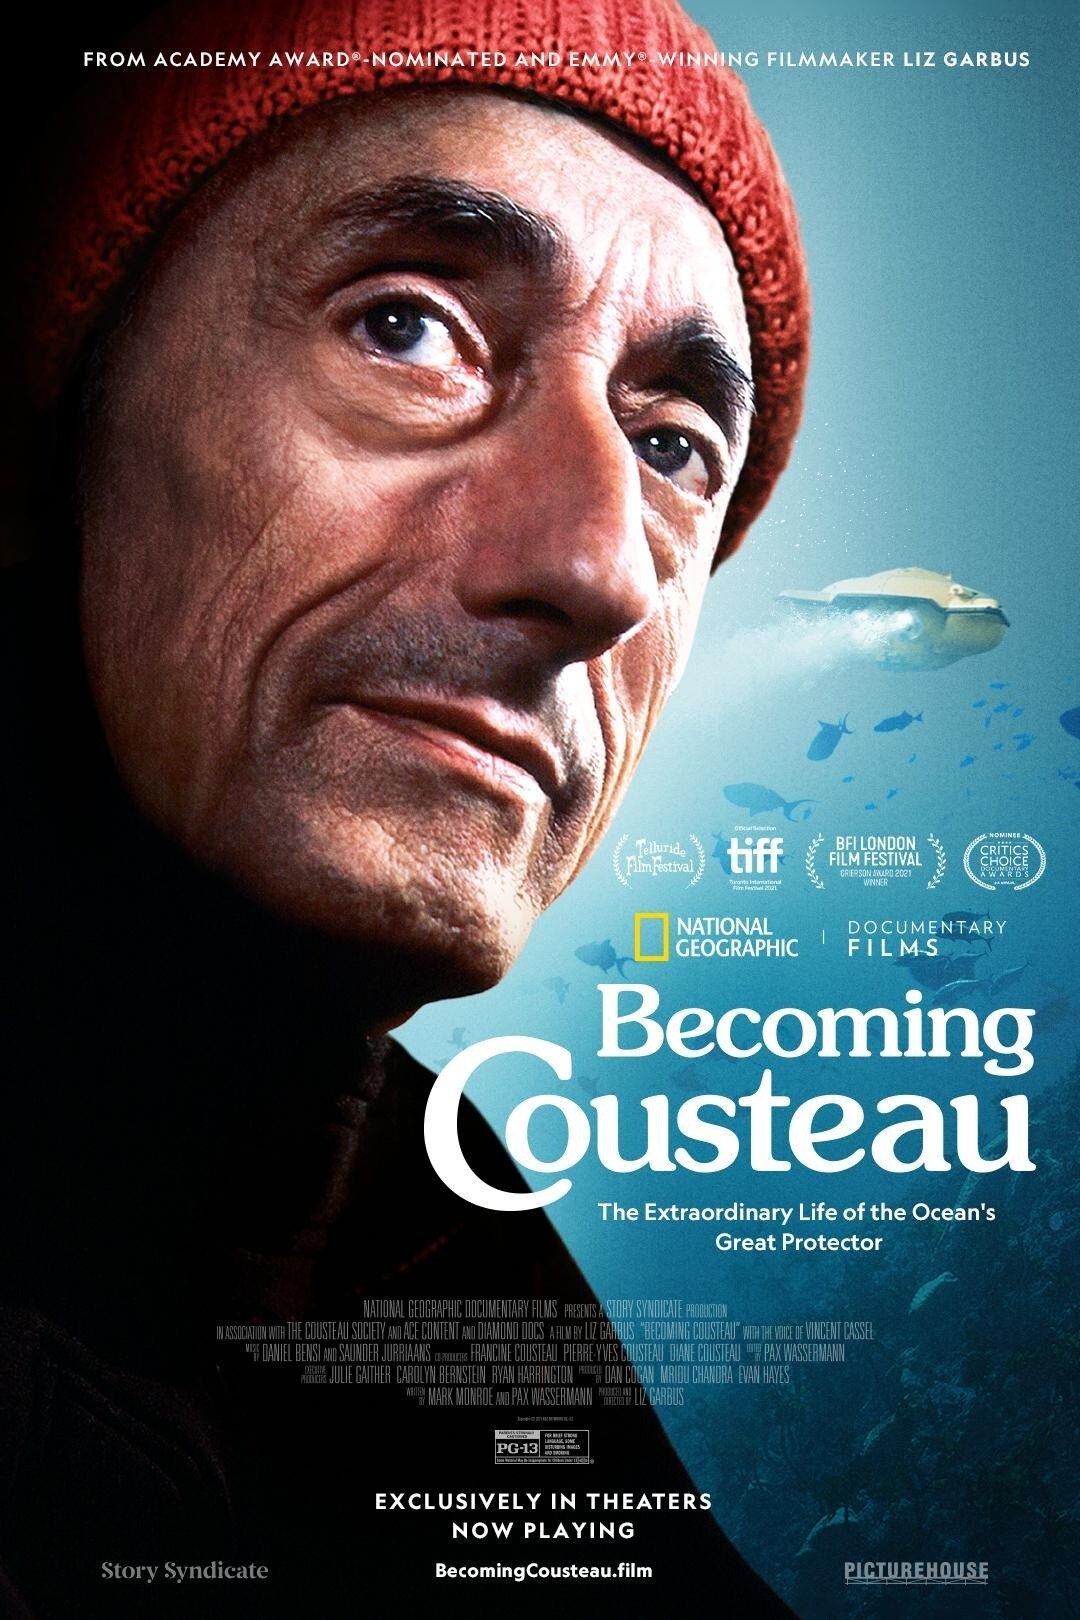 Becoming Cousteau poster art